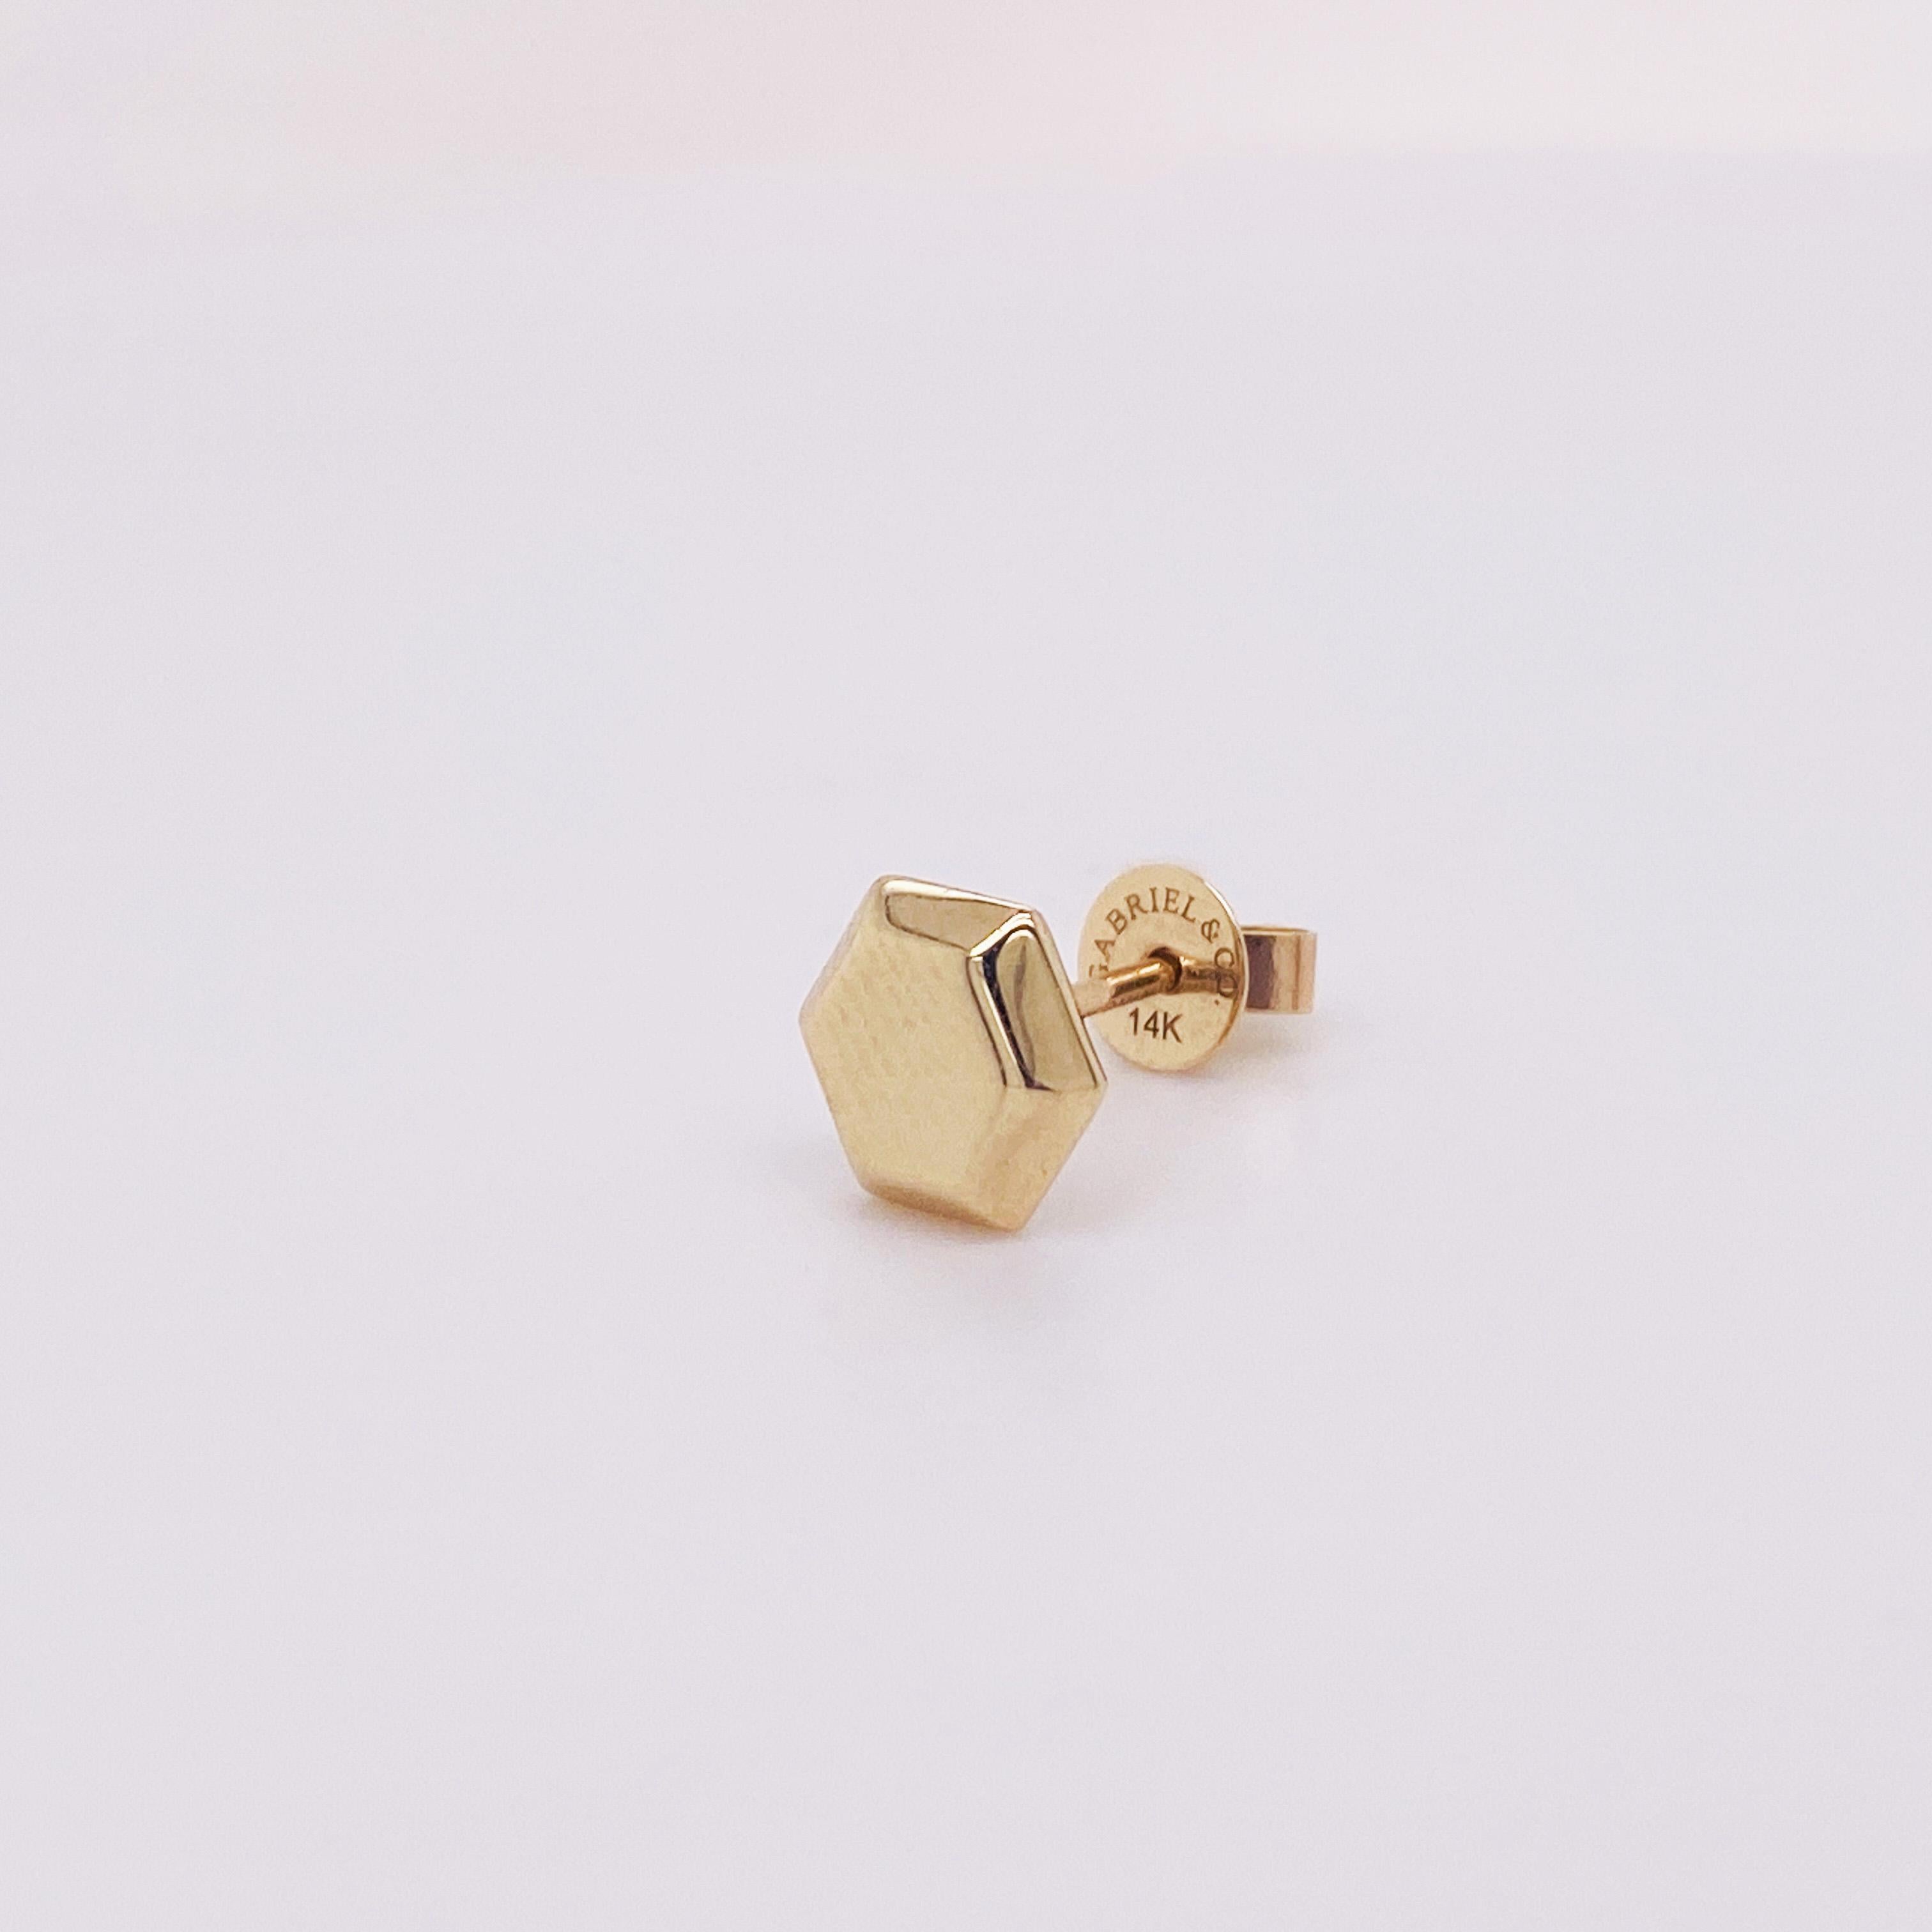 Ear Cuff Stud Versatile Combo 14k Yellow Gold, Hexagon Stud, EGS14462Y4JJJ LV In New Condition For Sale In Austin, TX